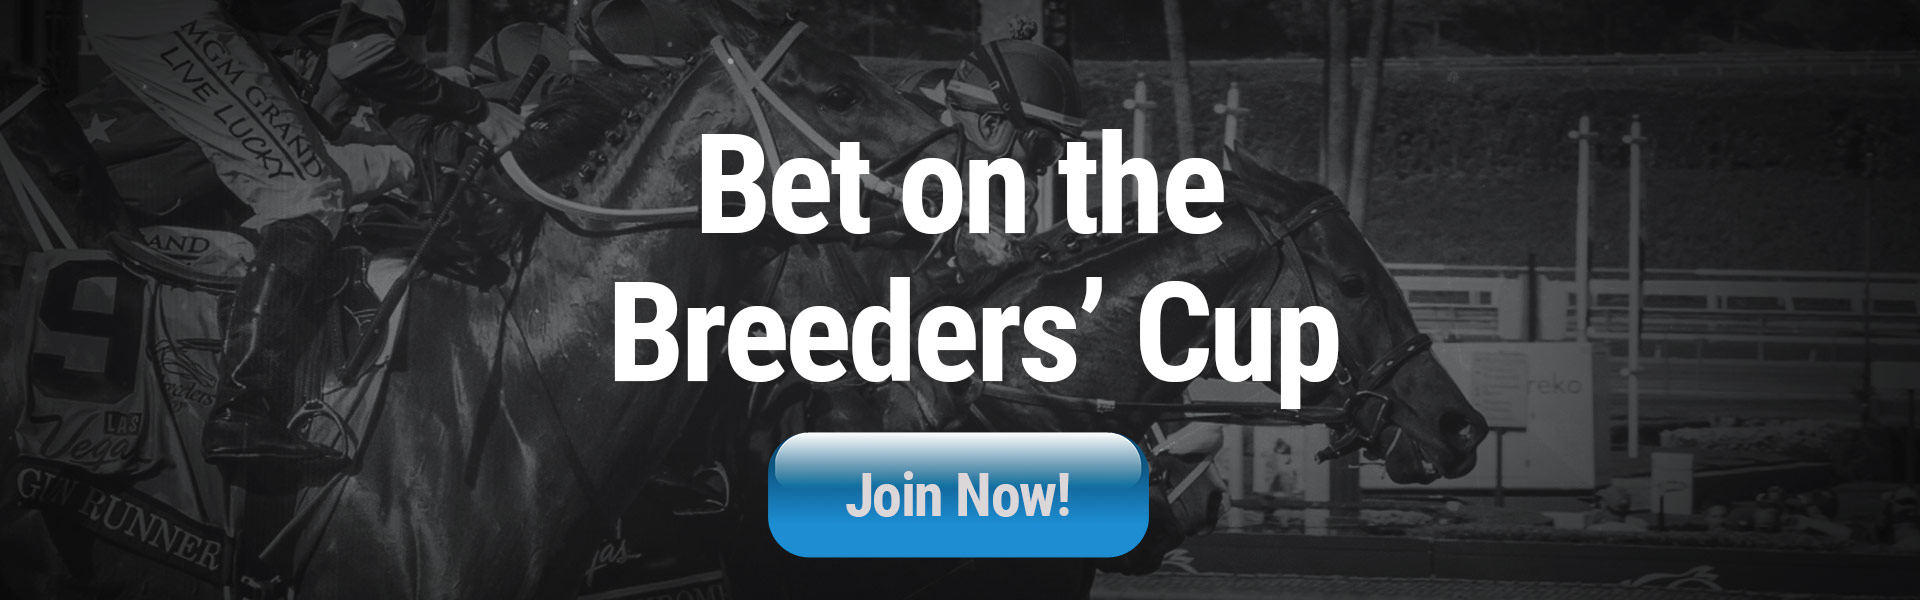 Bet the Breeders Cup